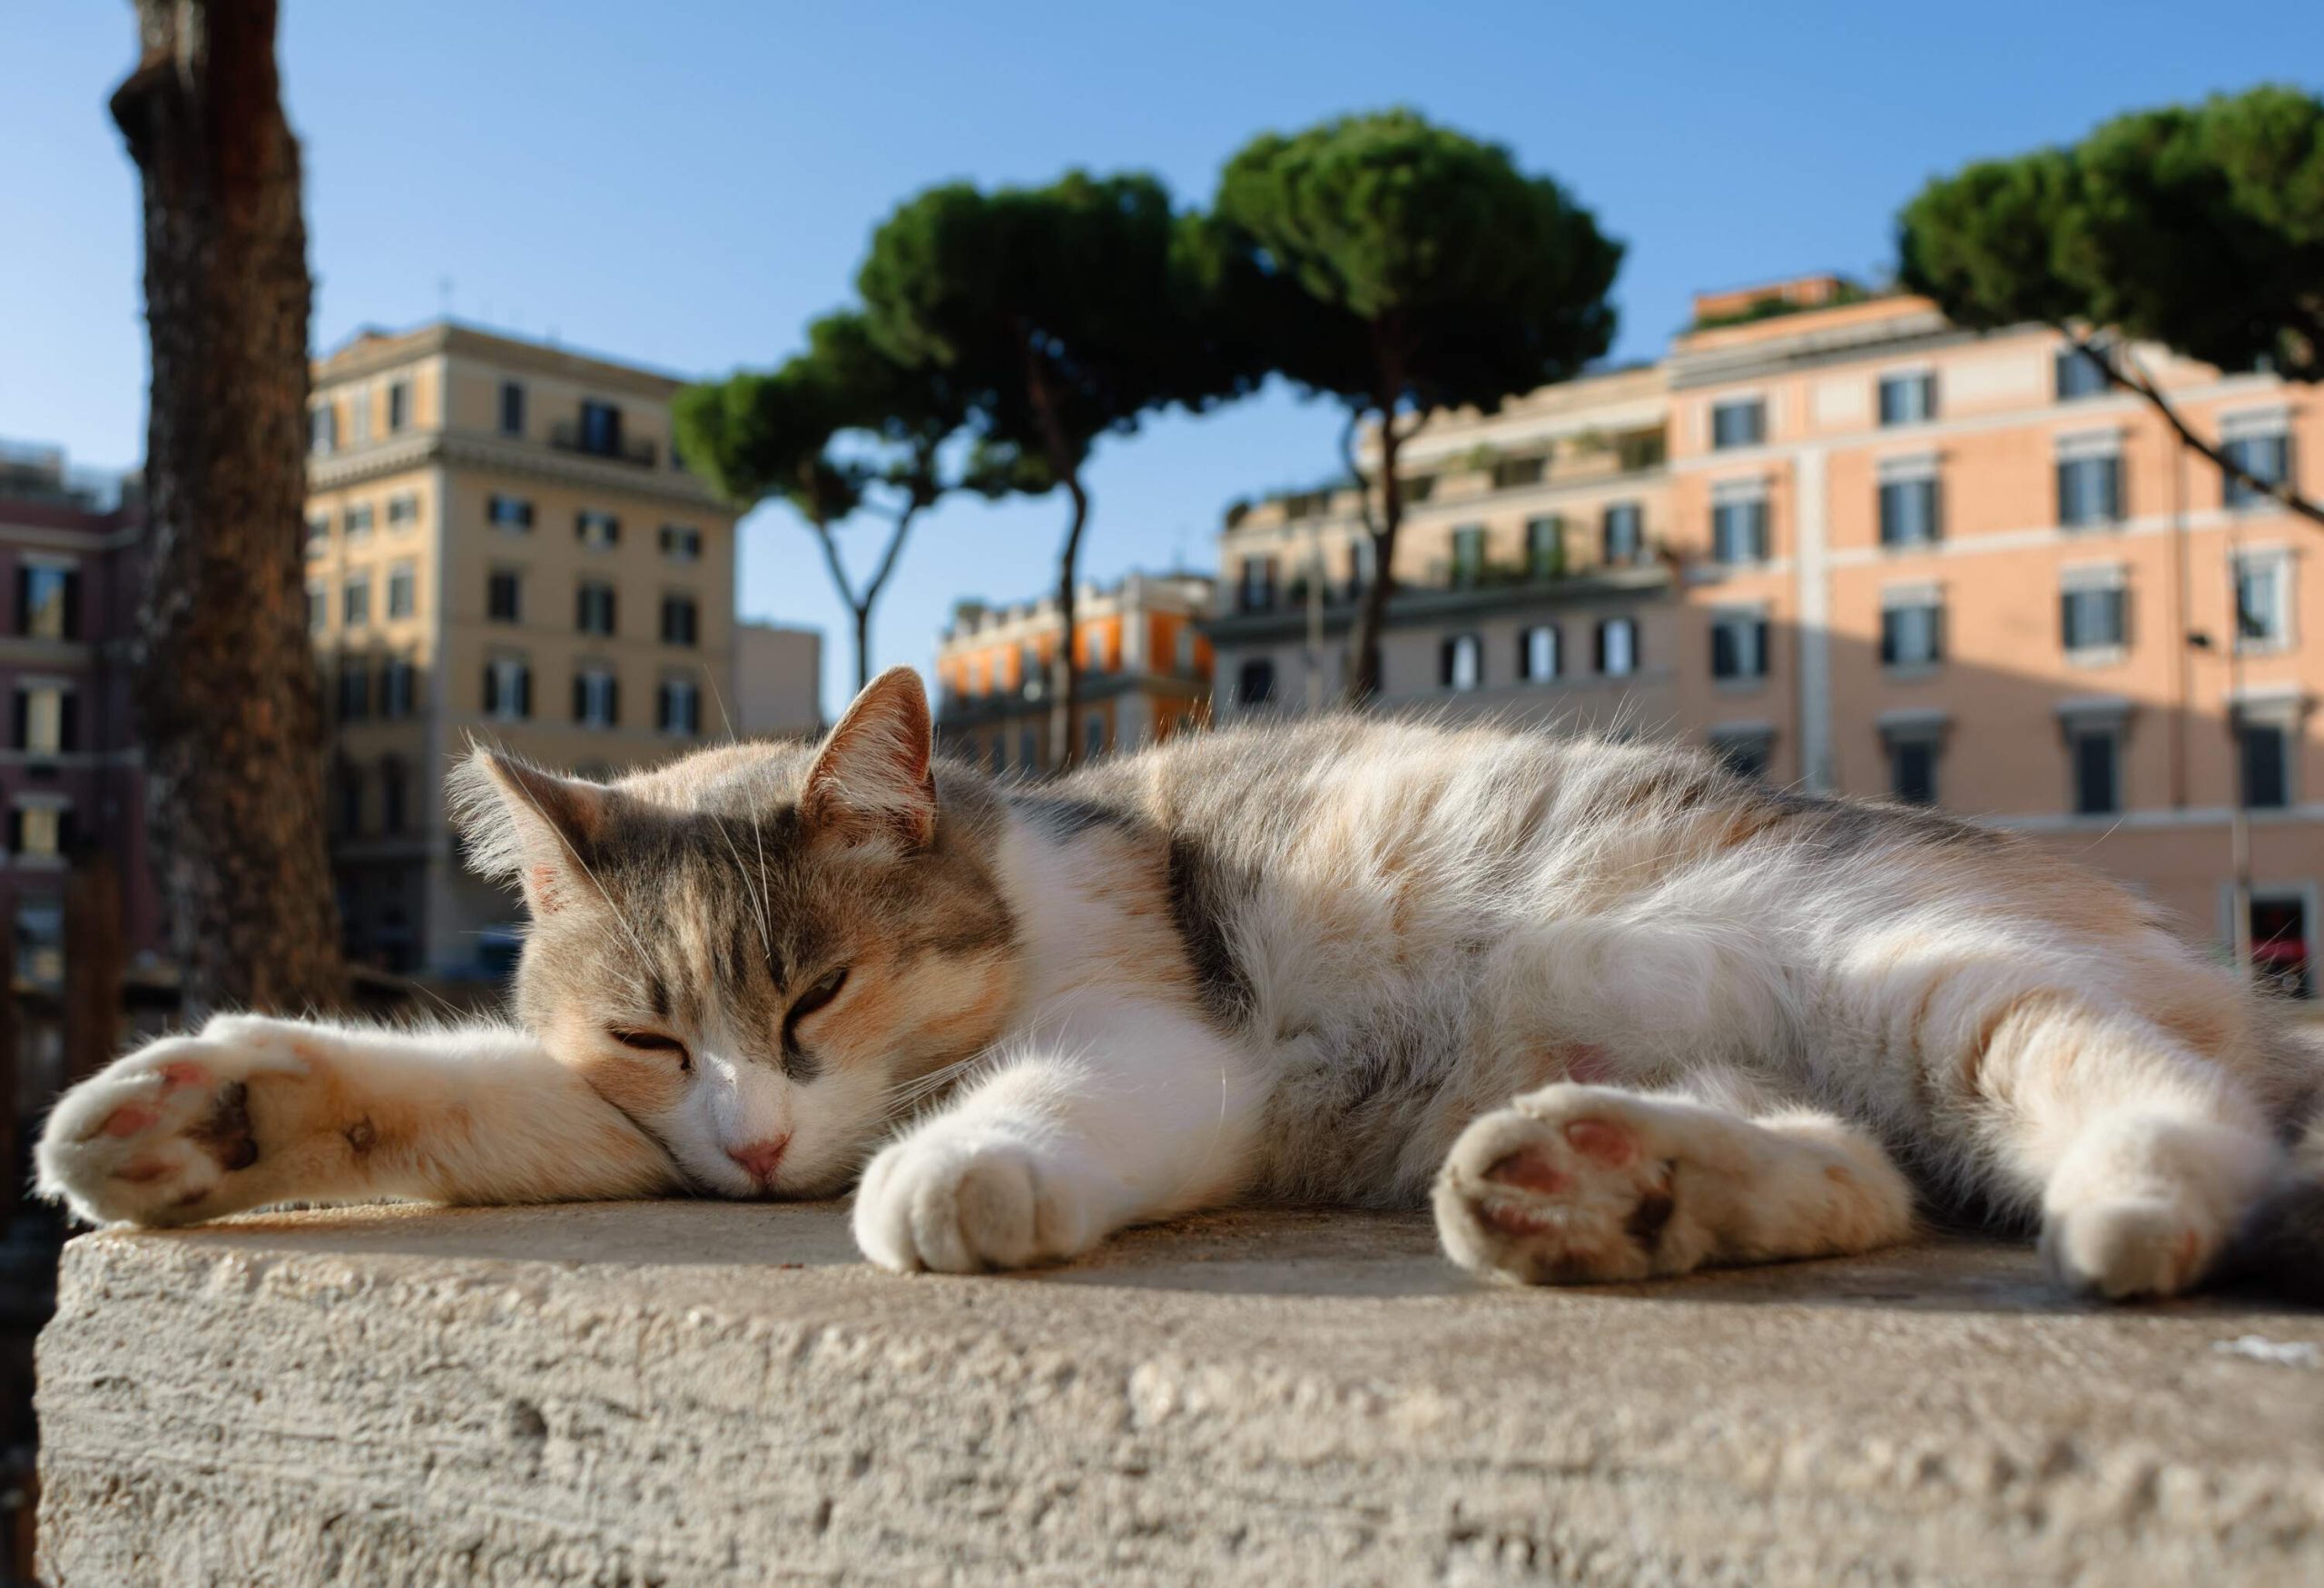 A contented cat takes a nap on a smooth concrete platform.